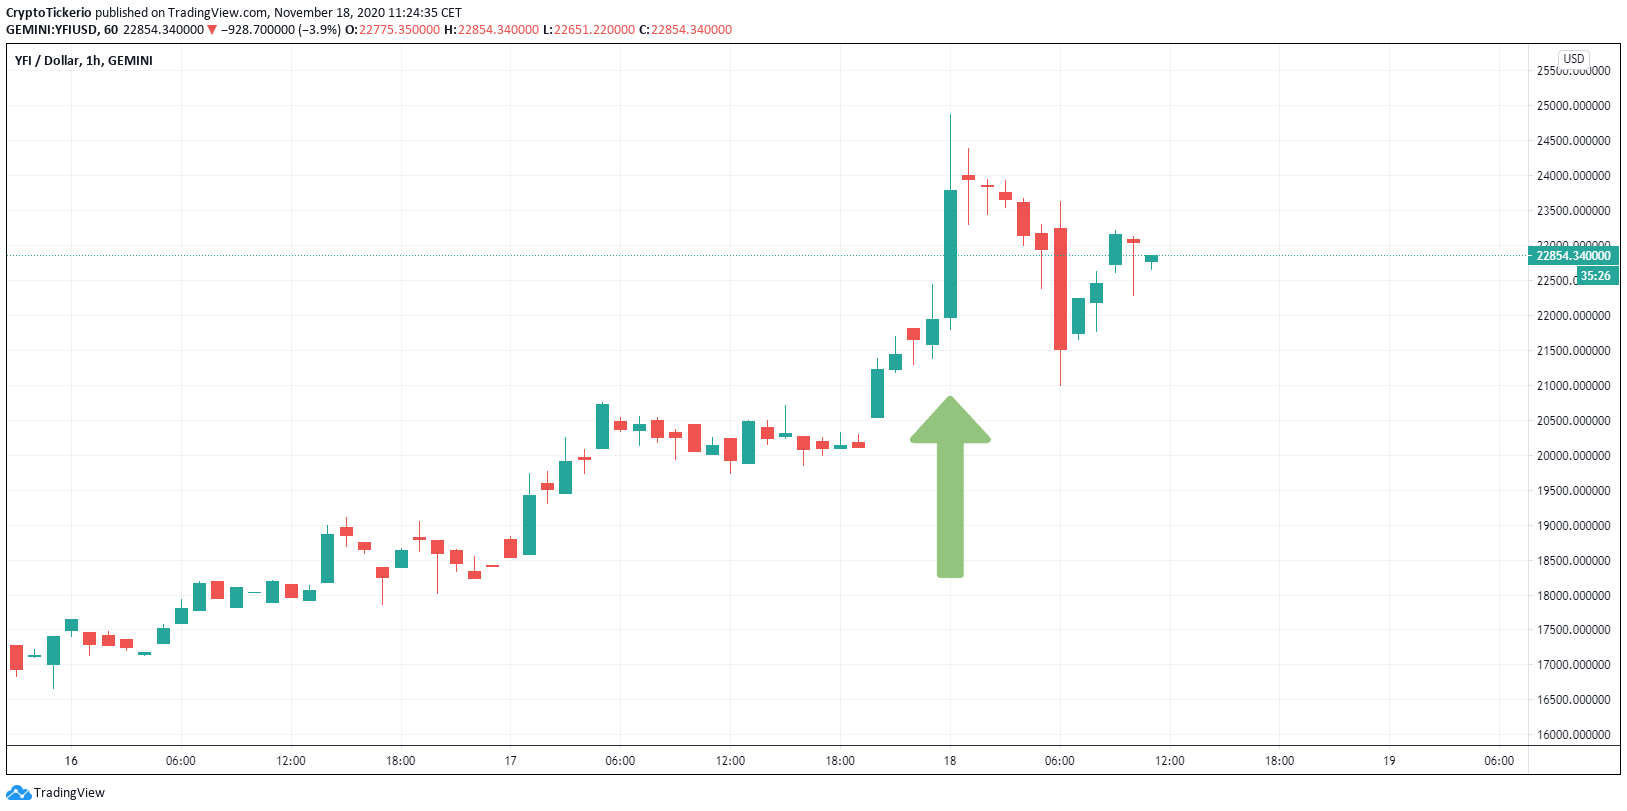 YFI/USD 1 Hour chart, showing the 1-hour price increase 